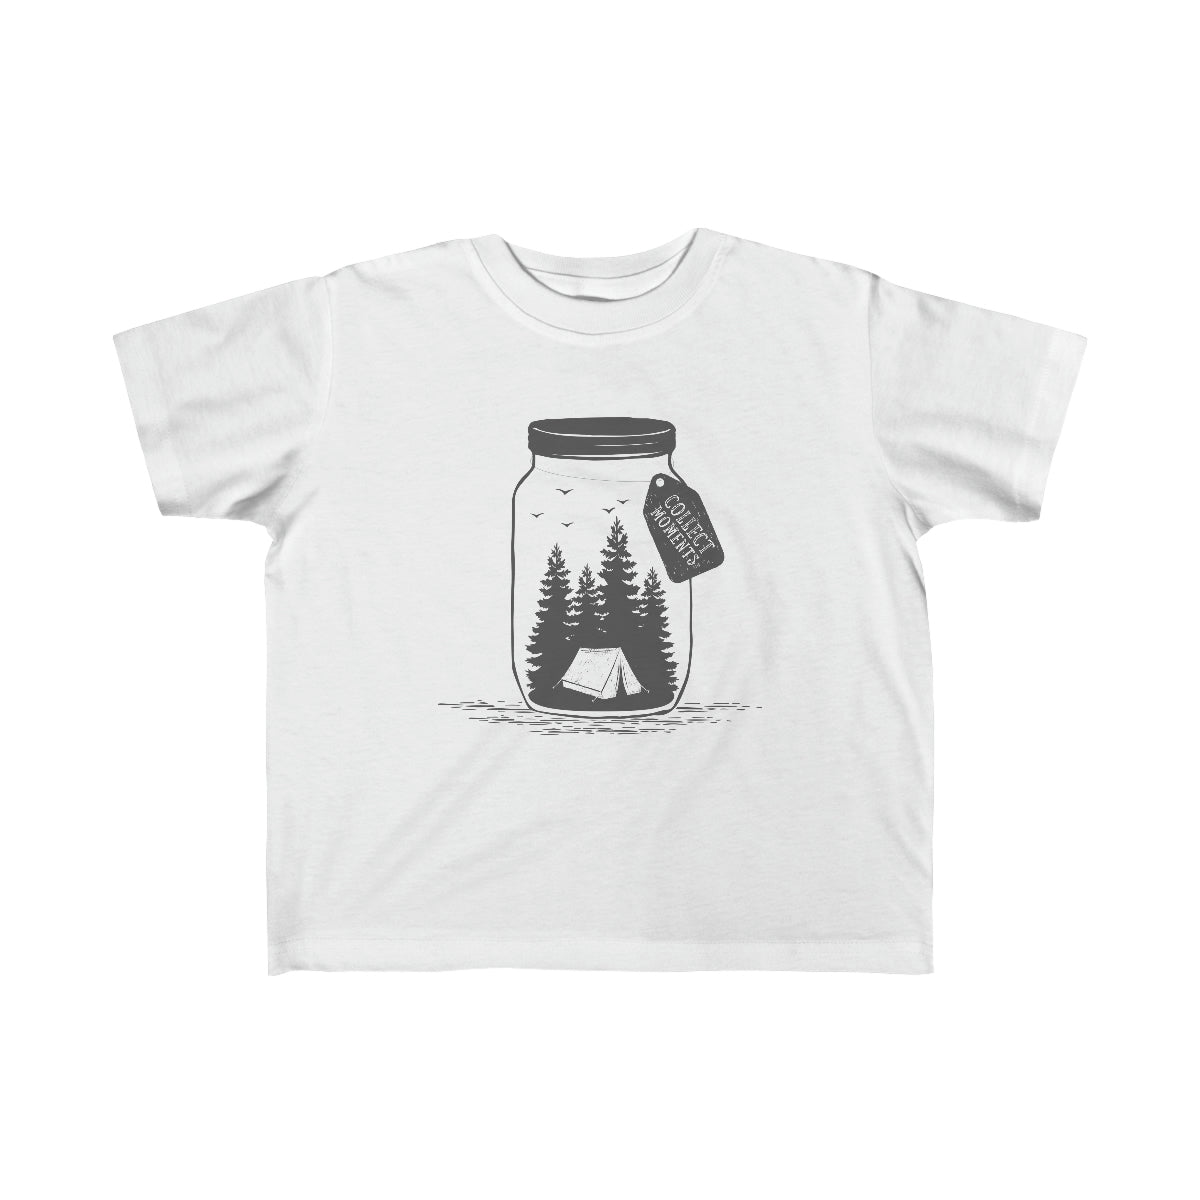 Collect Moments Not Things Toddler Tee White / 2T - The Northwest Store